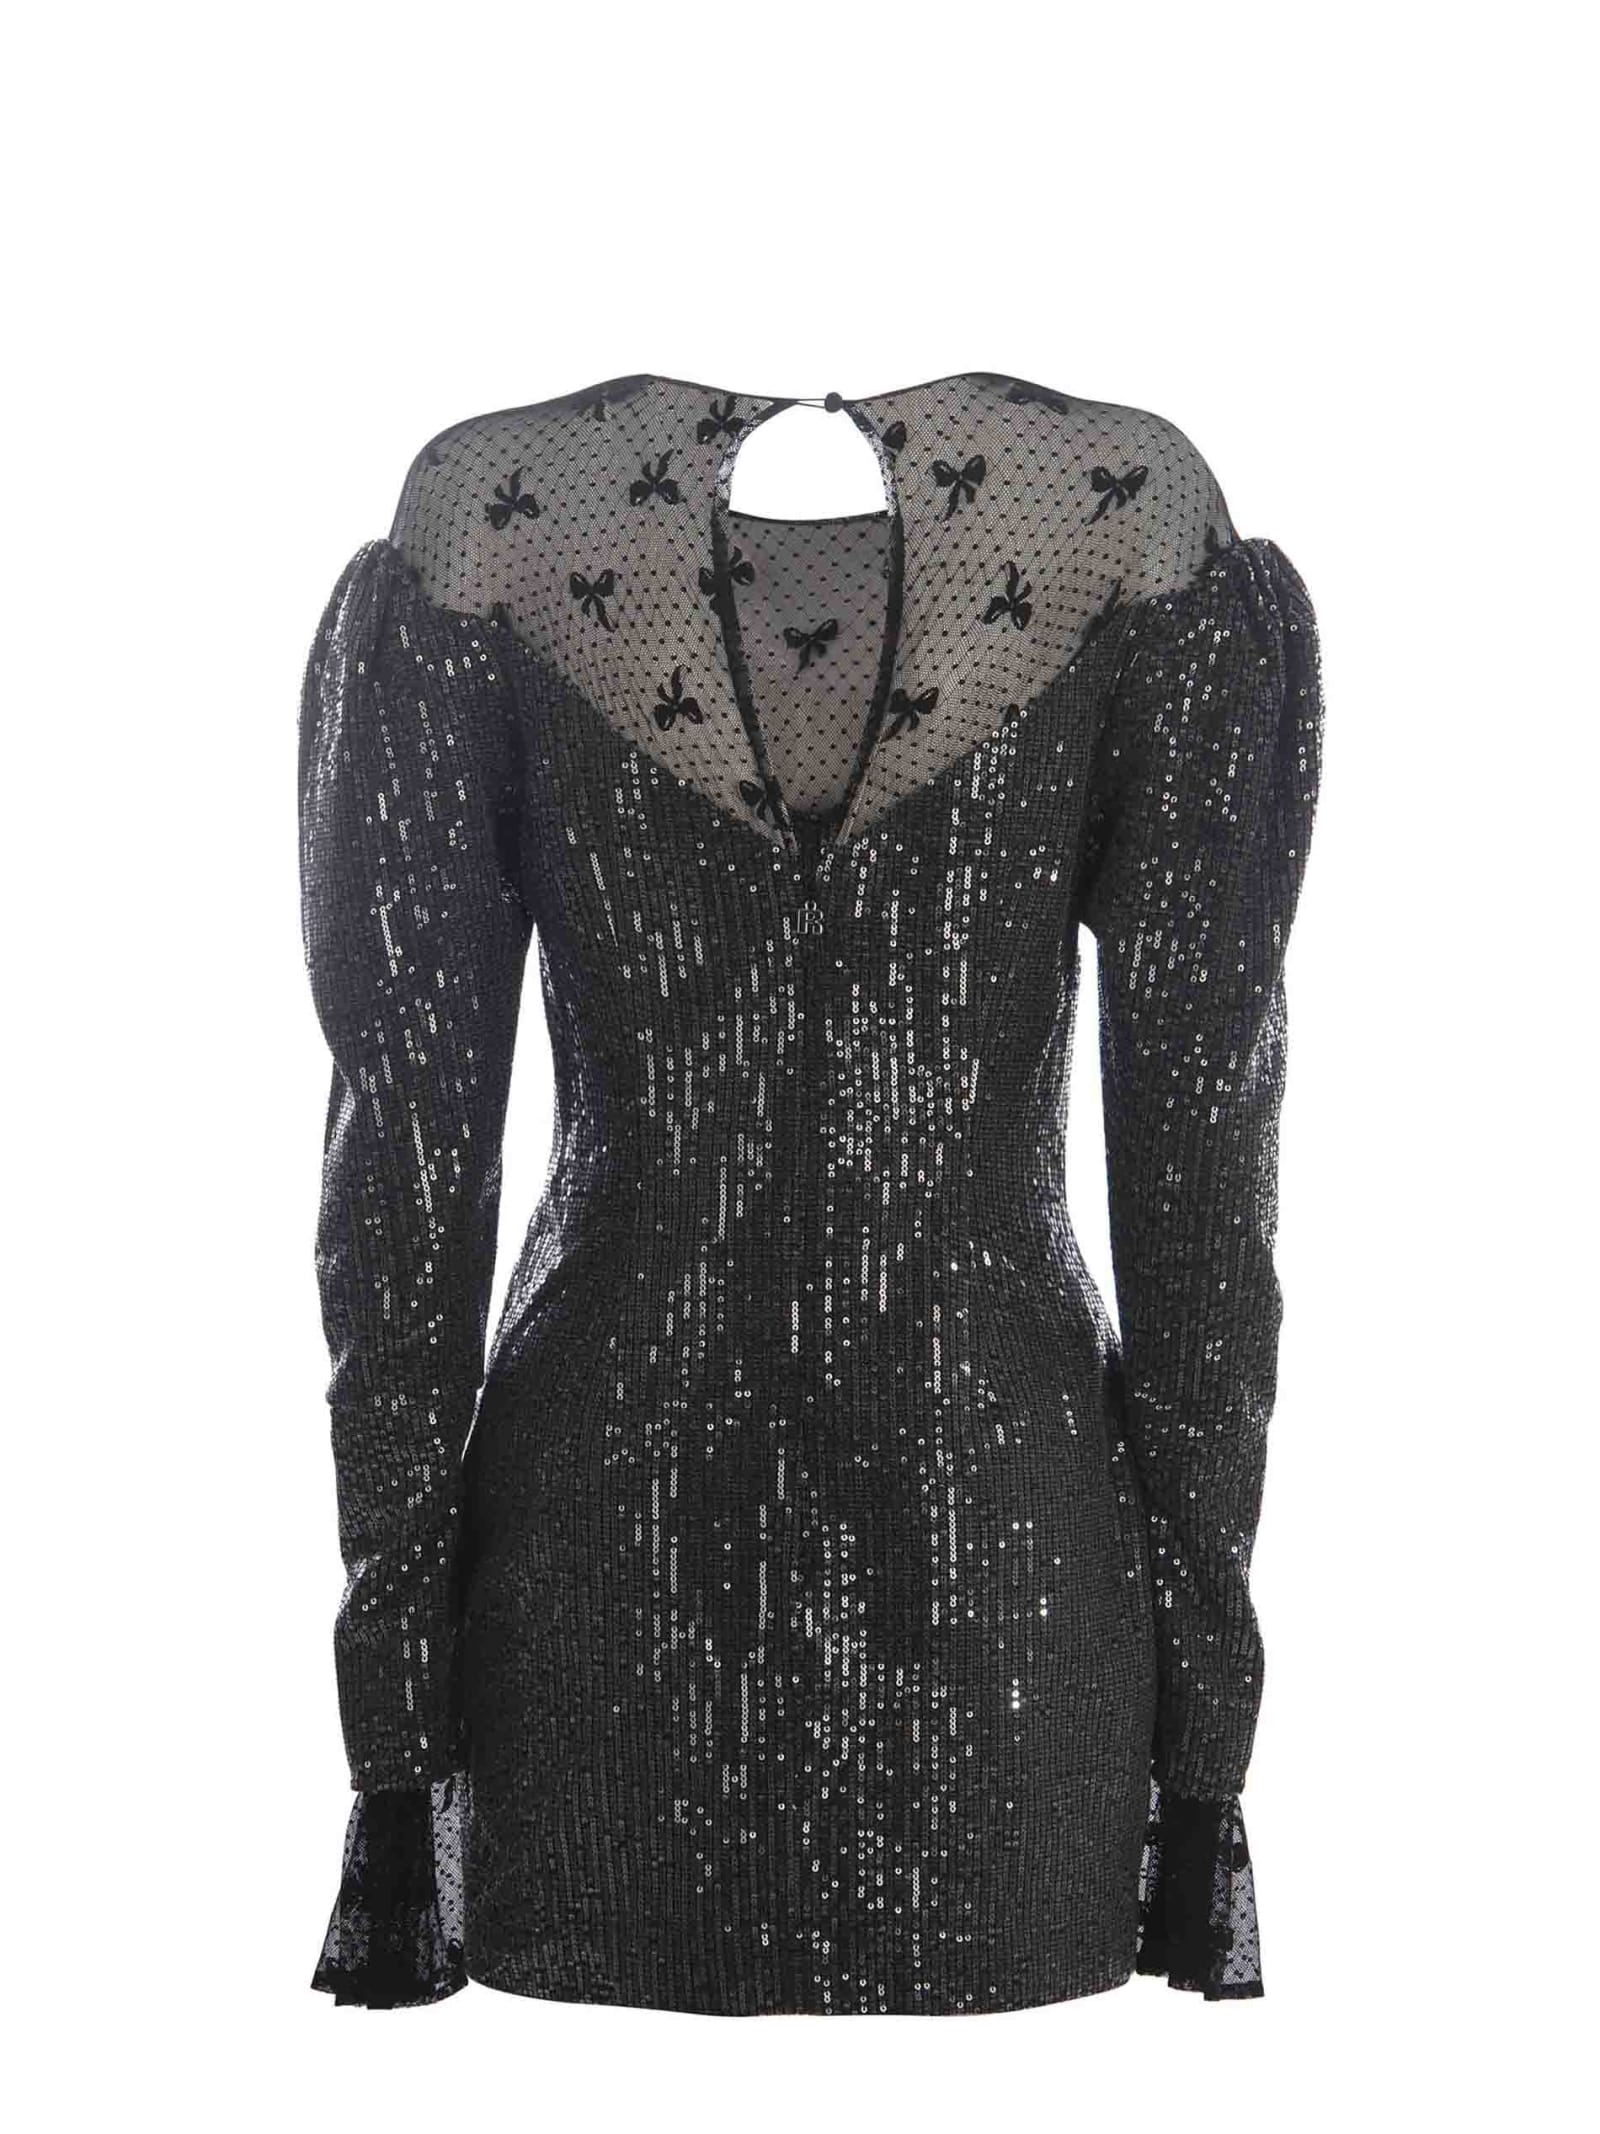 Shop Rotate Birger Christensen Dress Rotate Sequins Made Of Twill In Nero